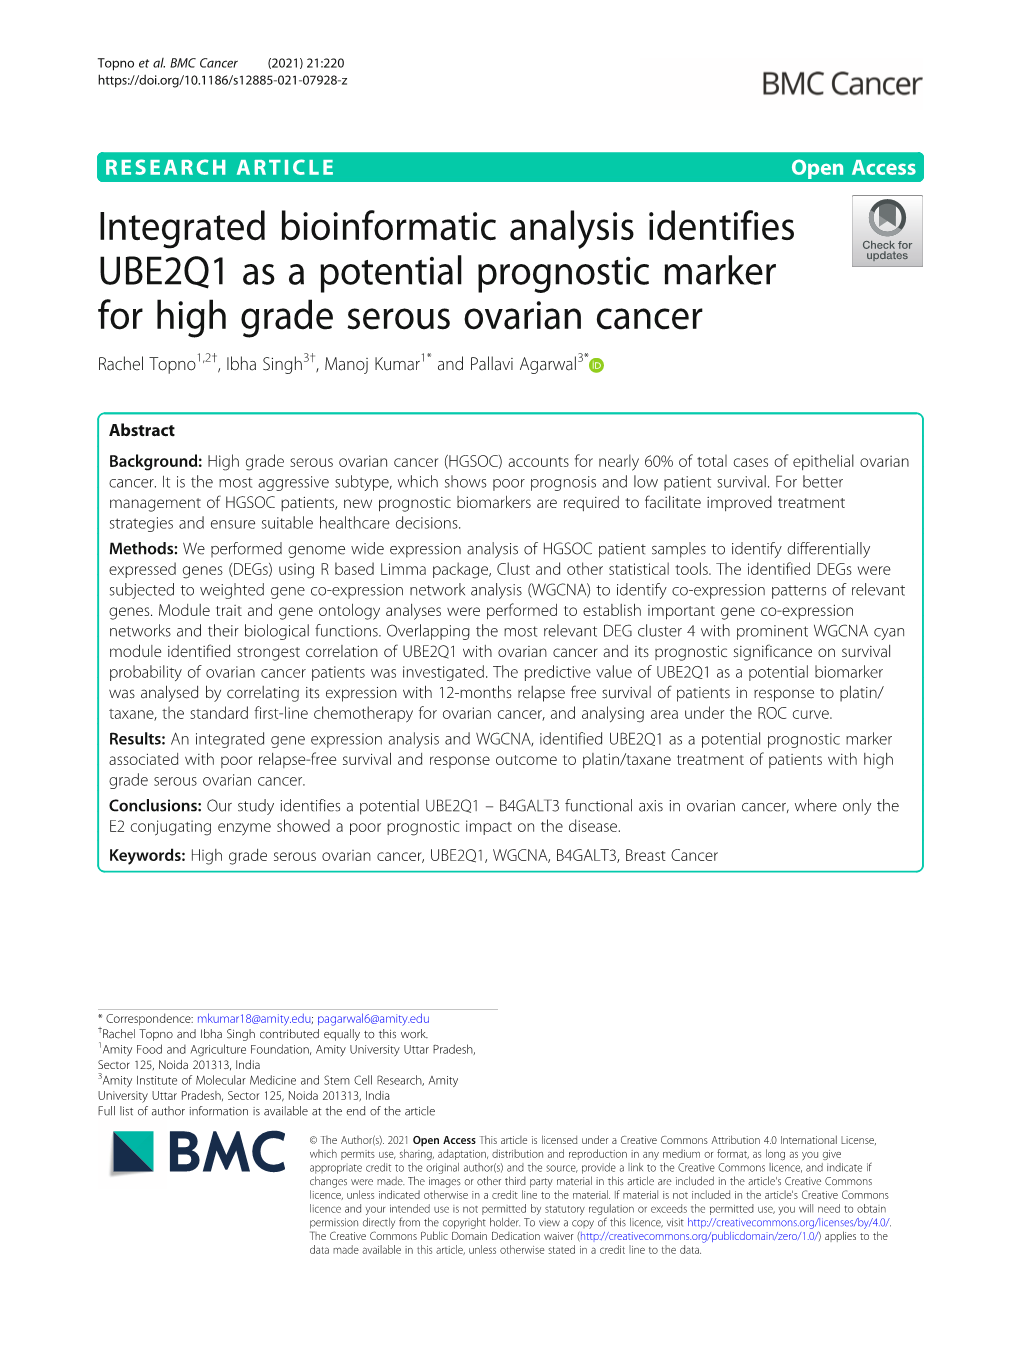 Integrated Bioinformatic Analysis Identifies UBE2Q1 As a Potential